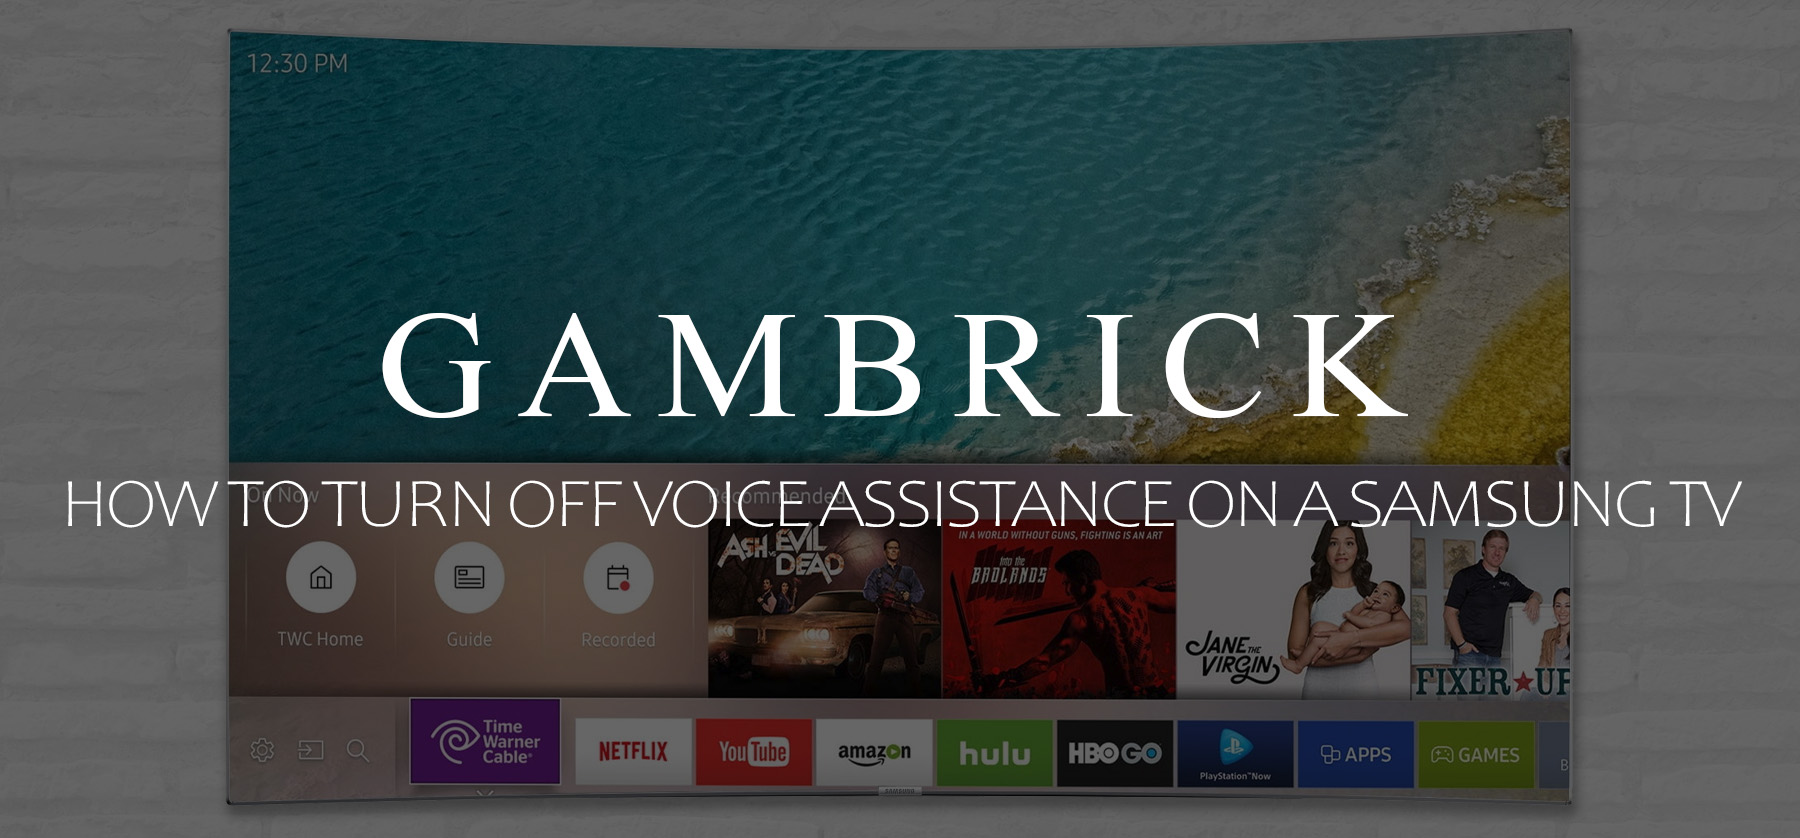 how to turn off voice assistance on Samsung TV banner 1.0